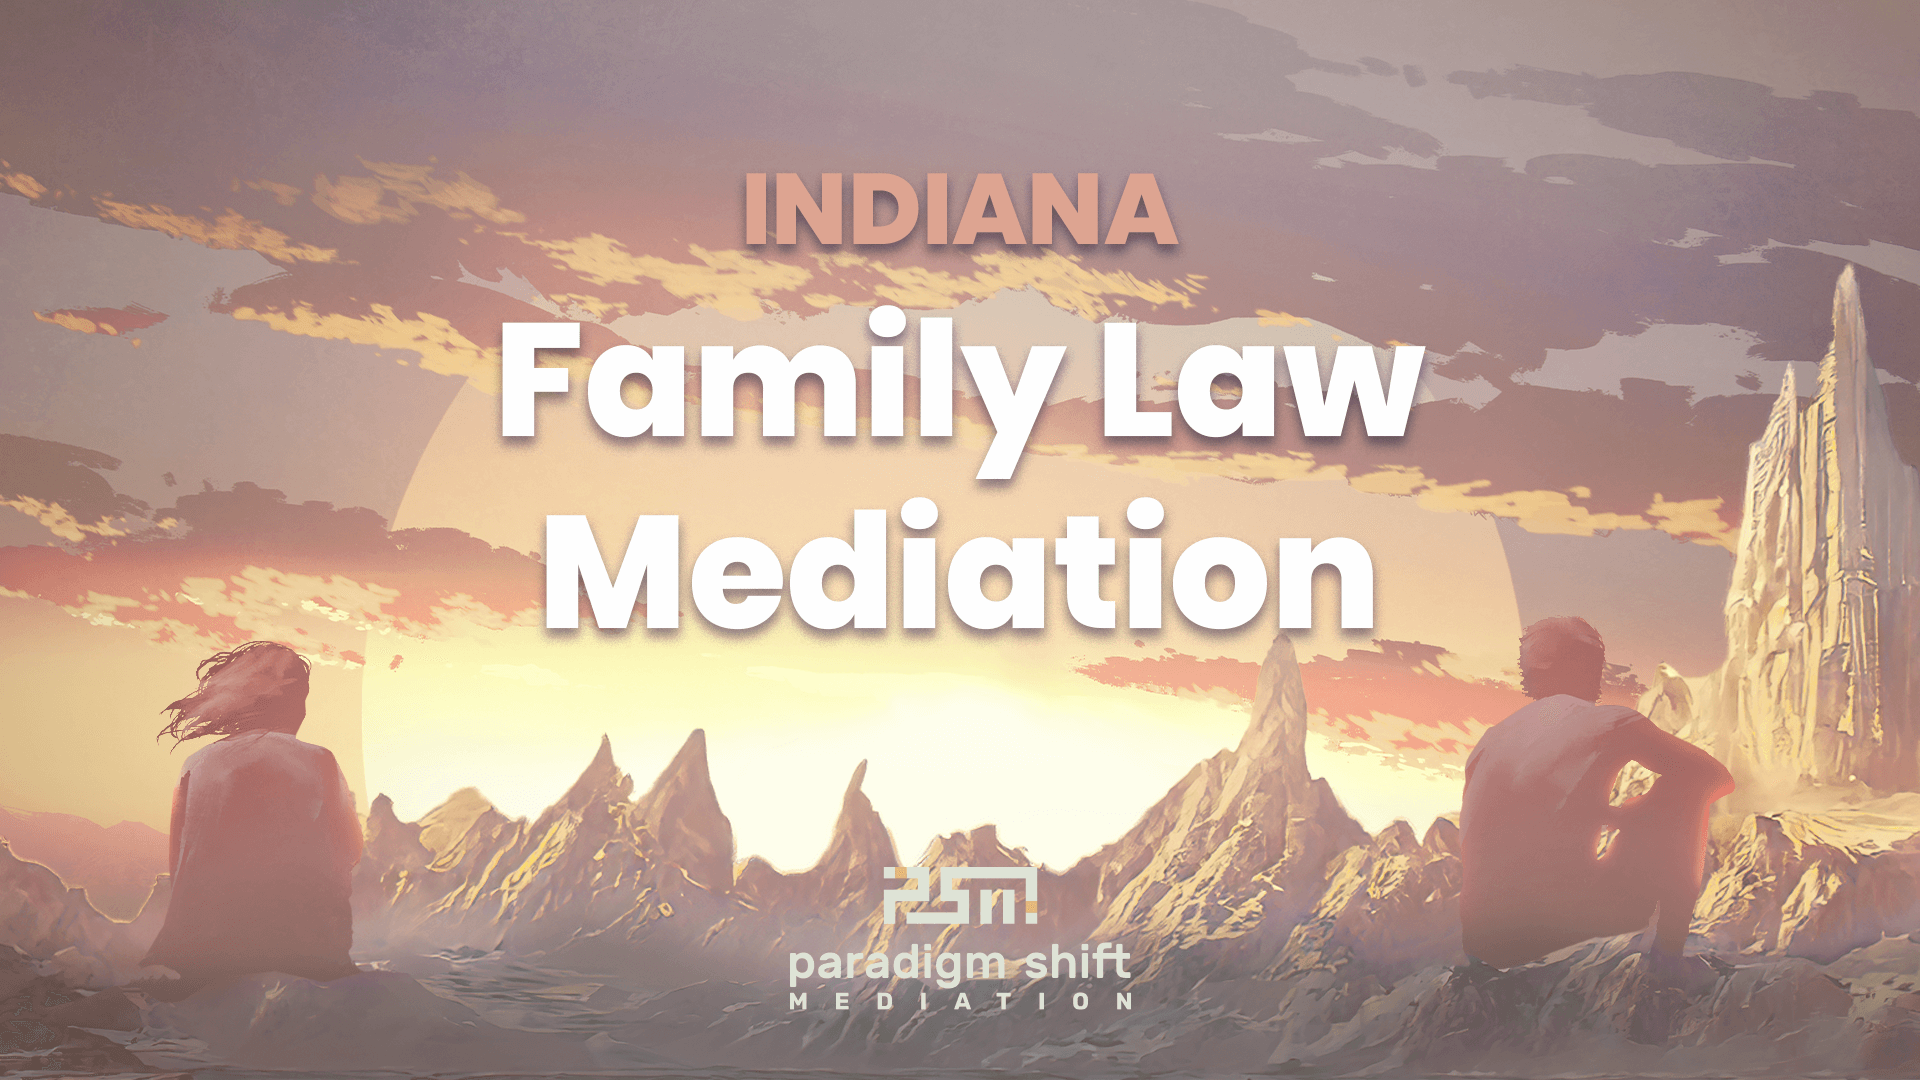 Indiana Family Law Mediation Mediation keeps you in the driver’s seat